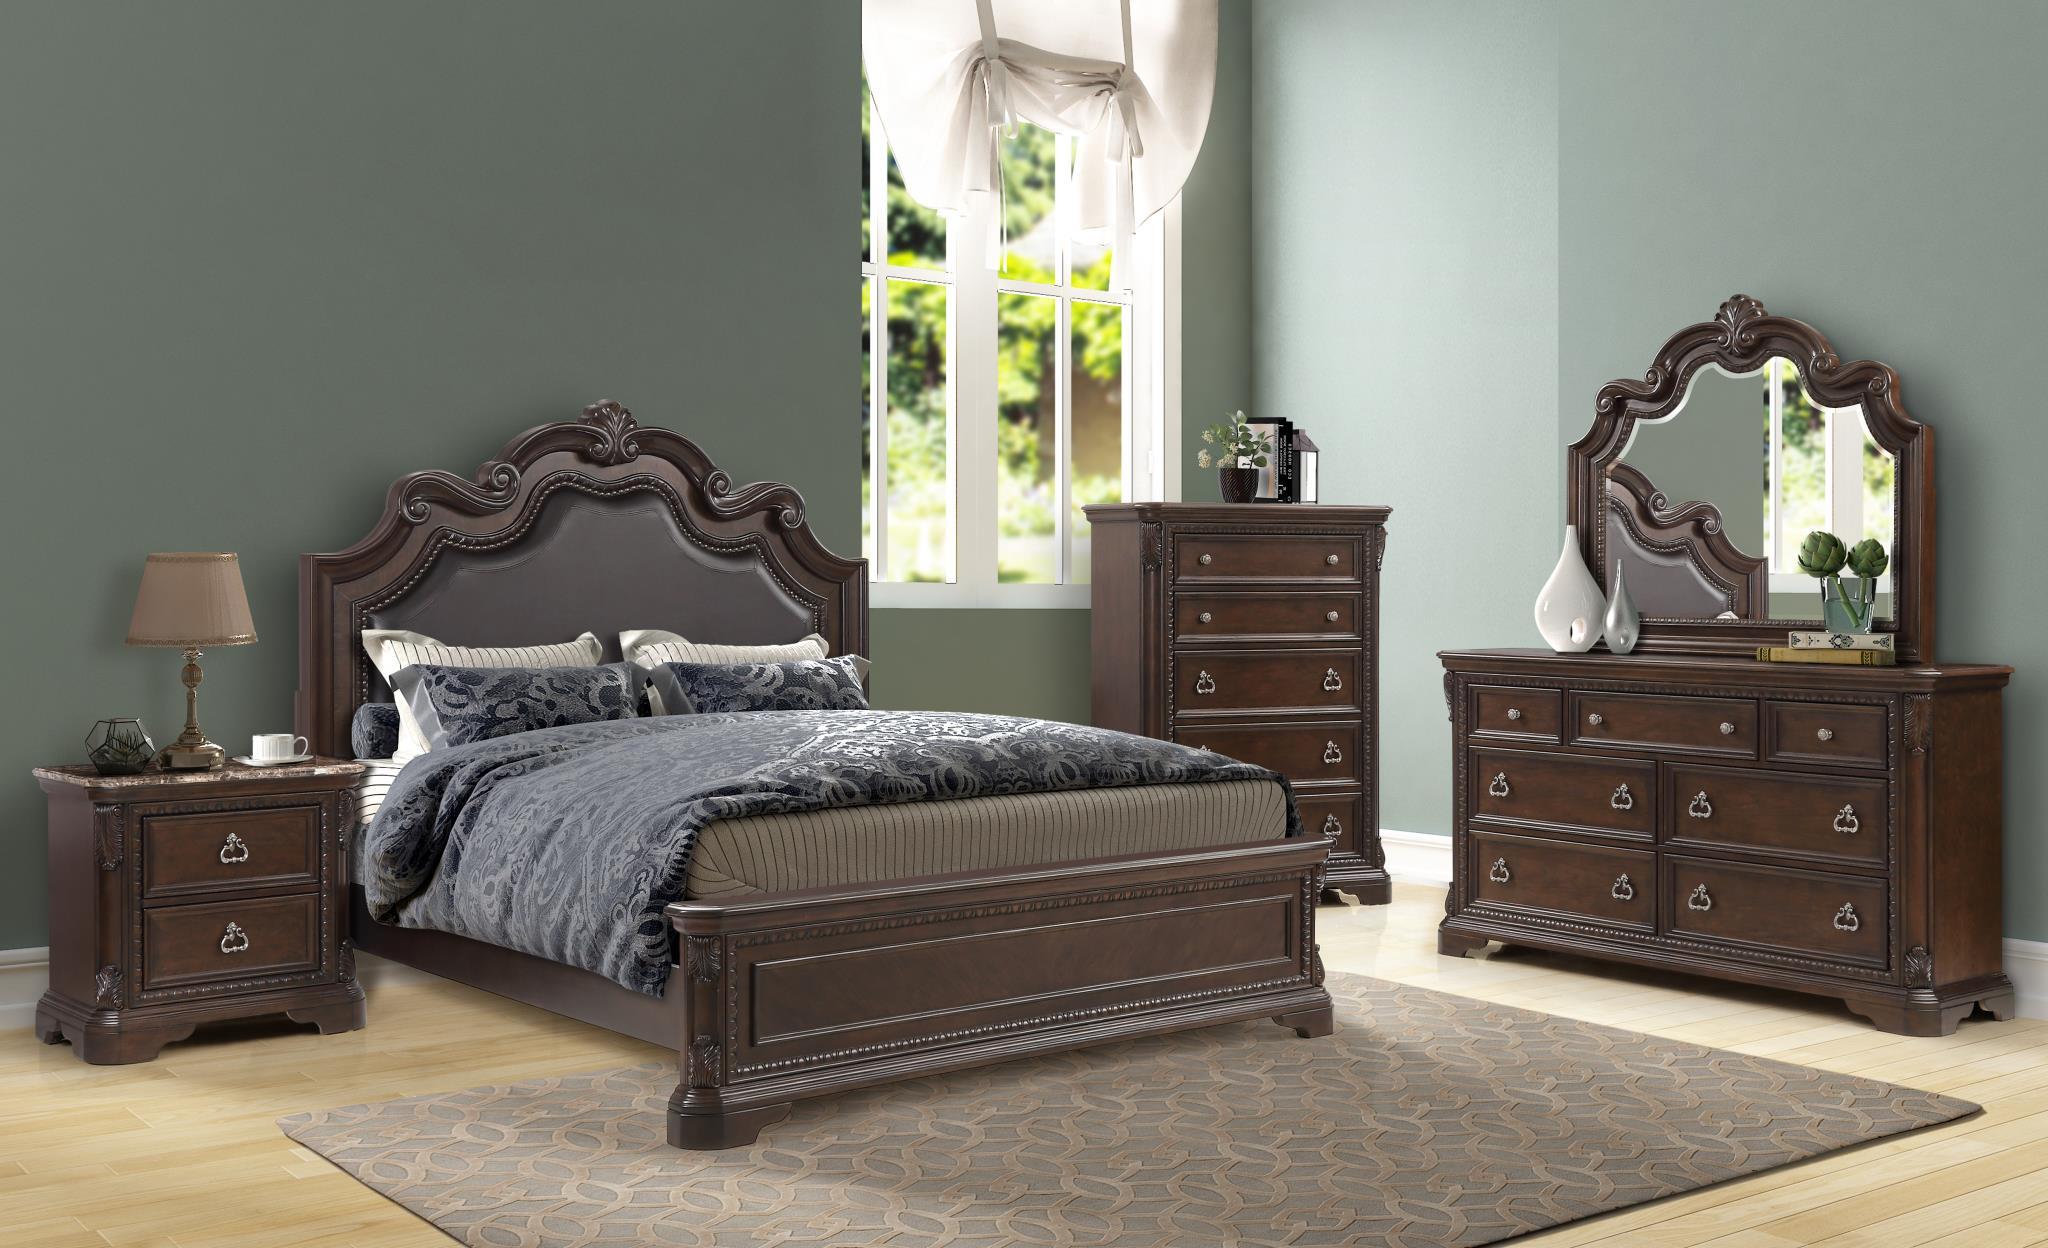 Modern, Transitional Panel Bed COVENTRY 1988-107 1988-107 in Mahogany Bonded Leather